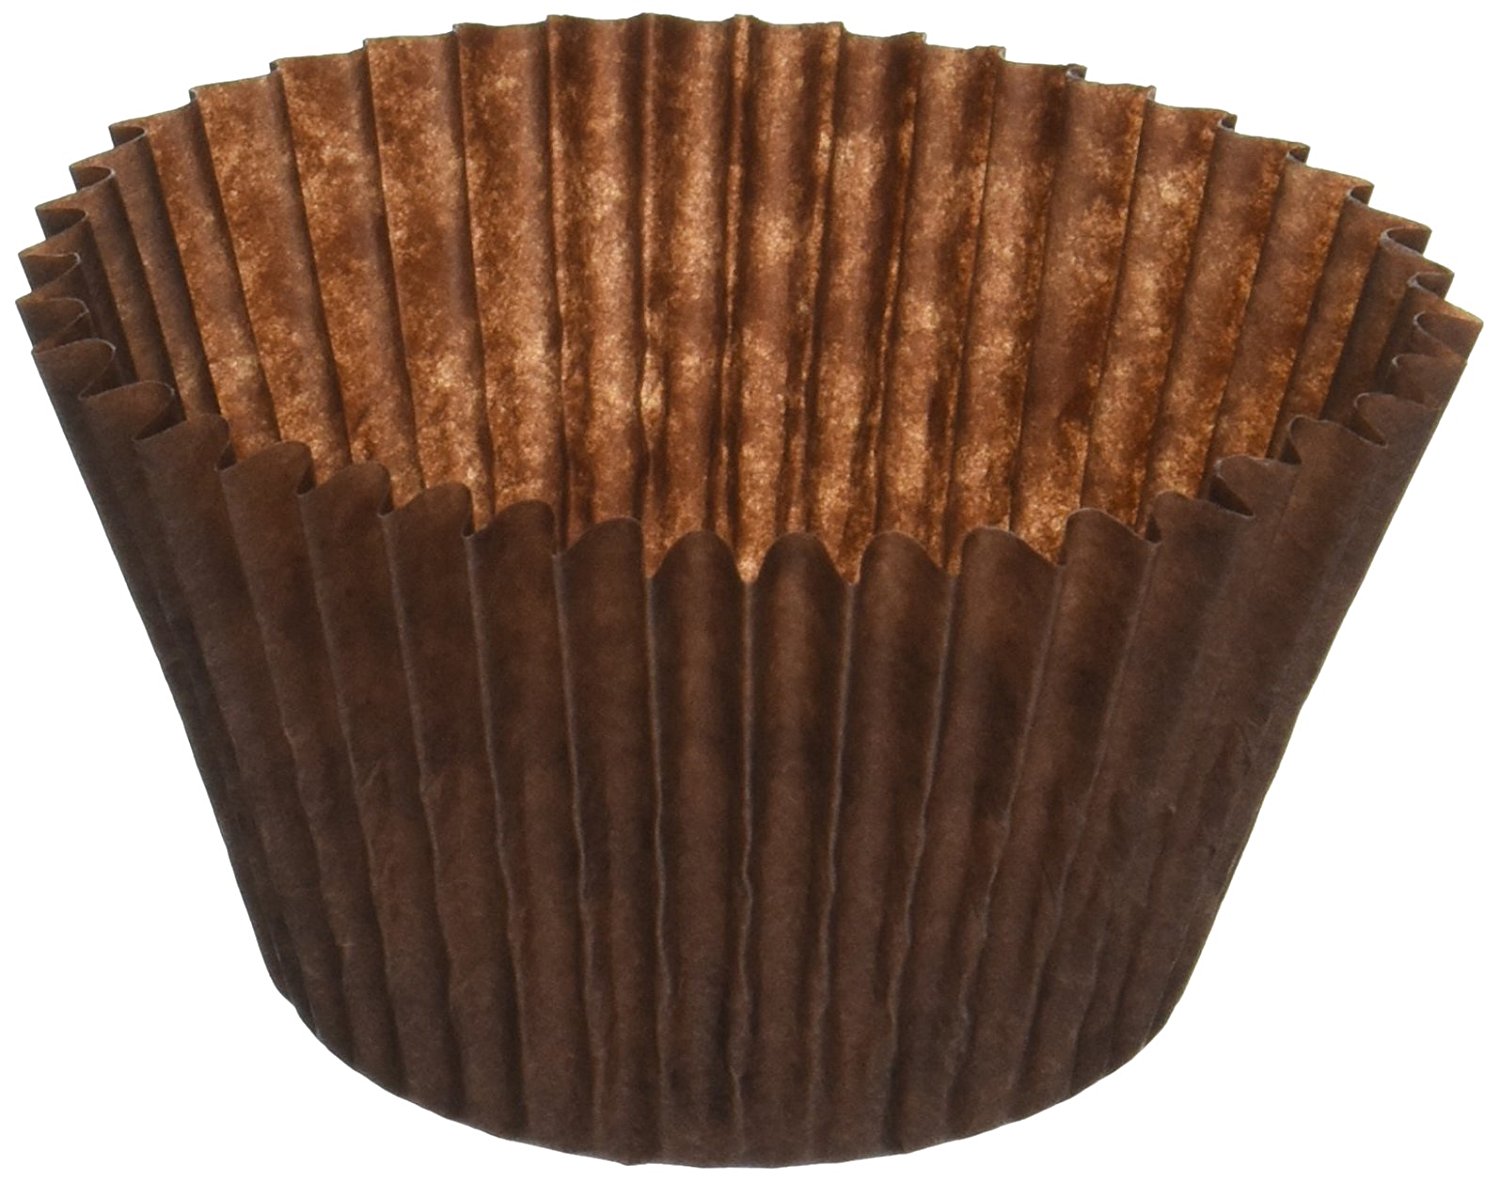 WHOLESALE) {SPECIAL} Brown Cupcake Liners 2 x 1 3/8 - 18000 count – Bakers  Stock